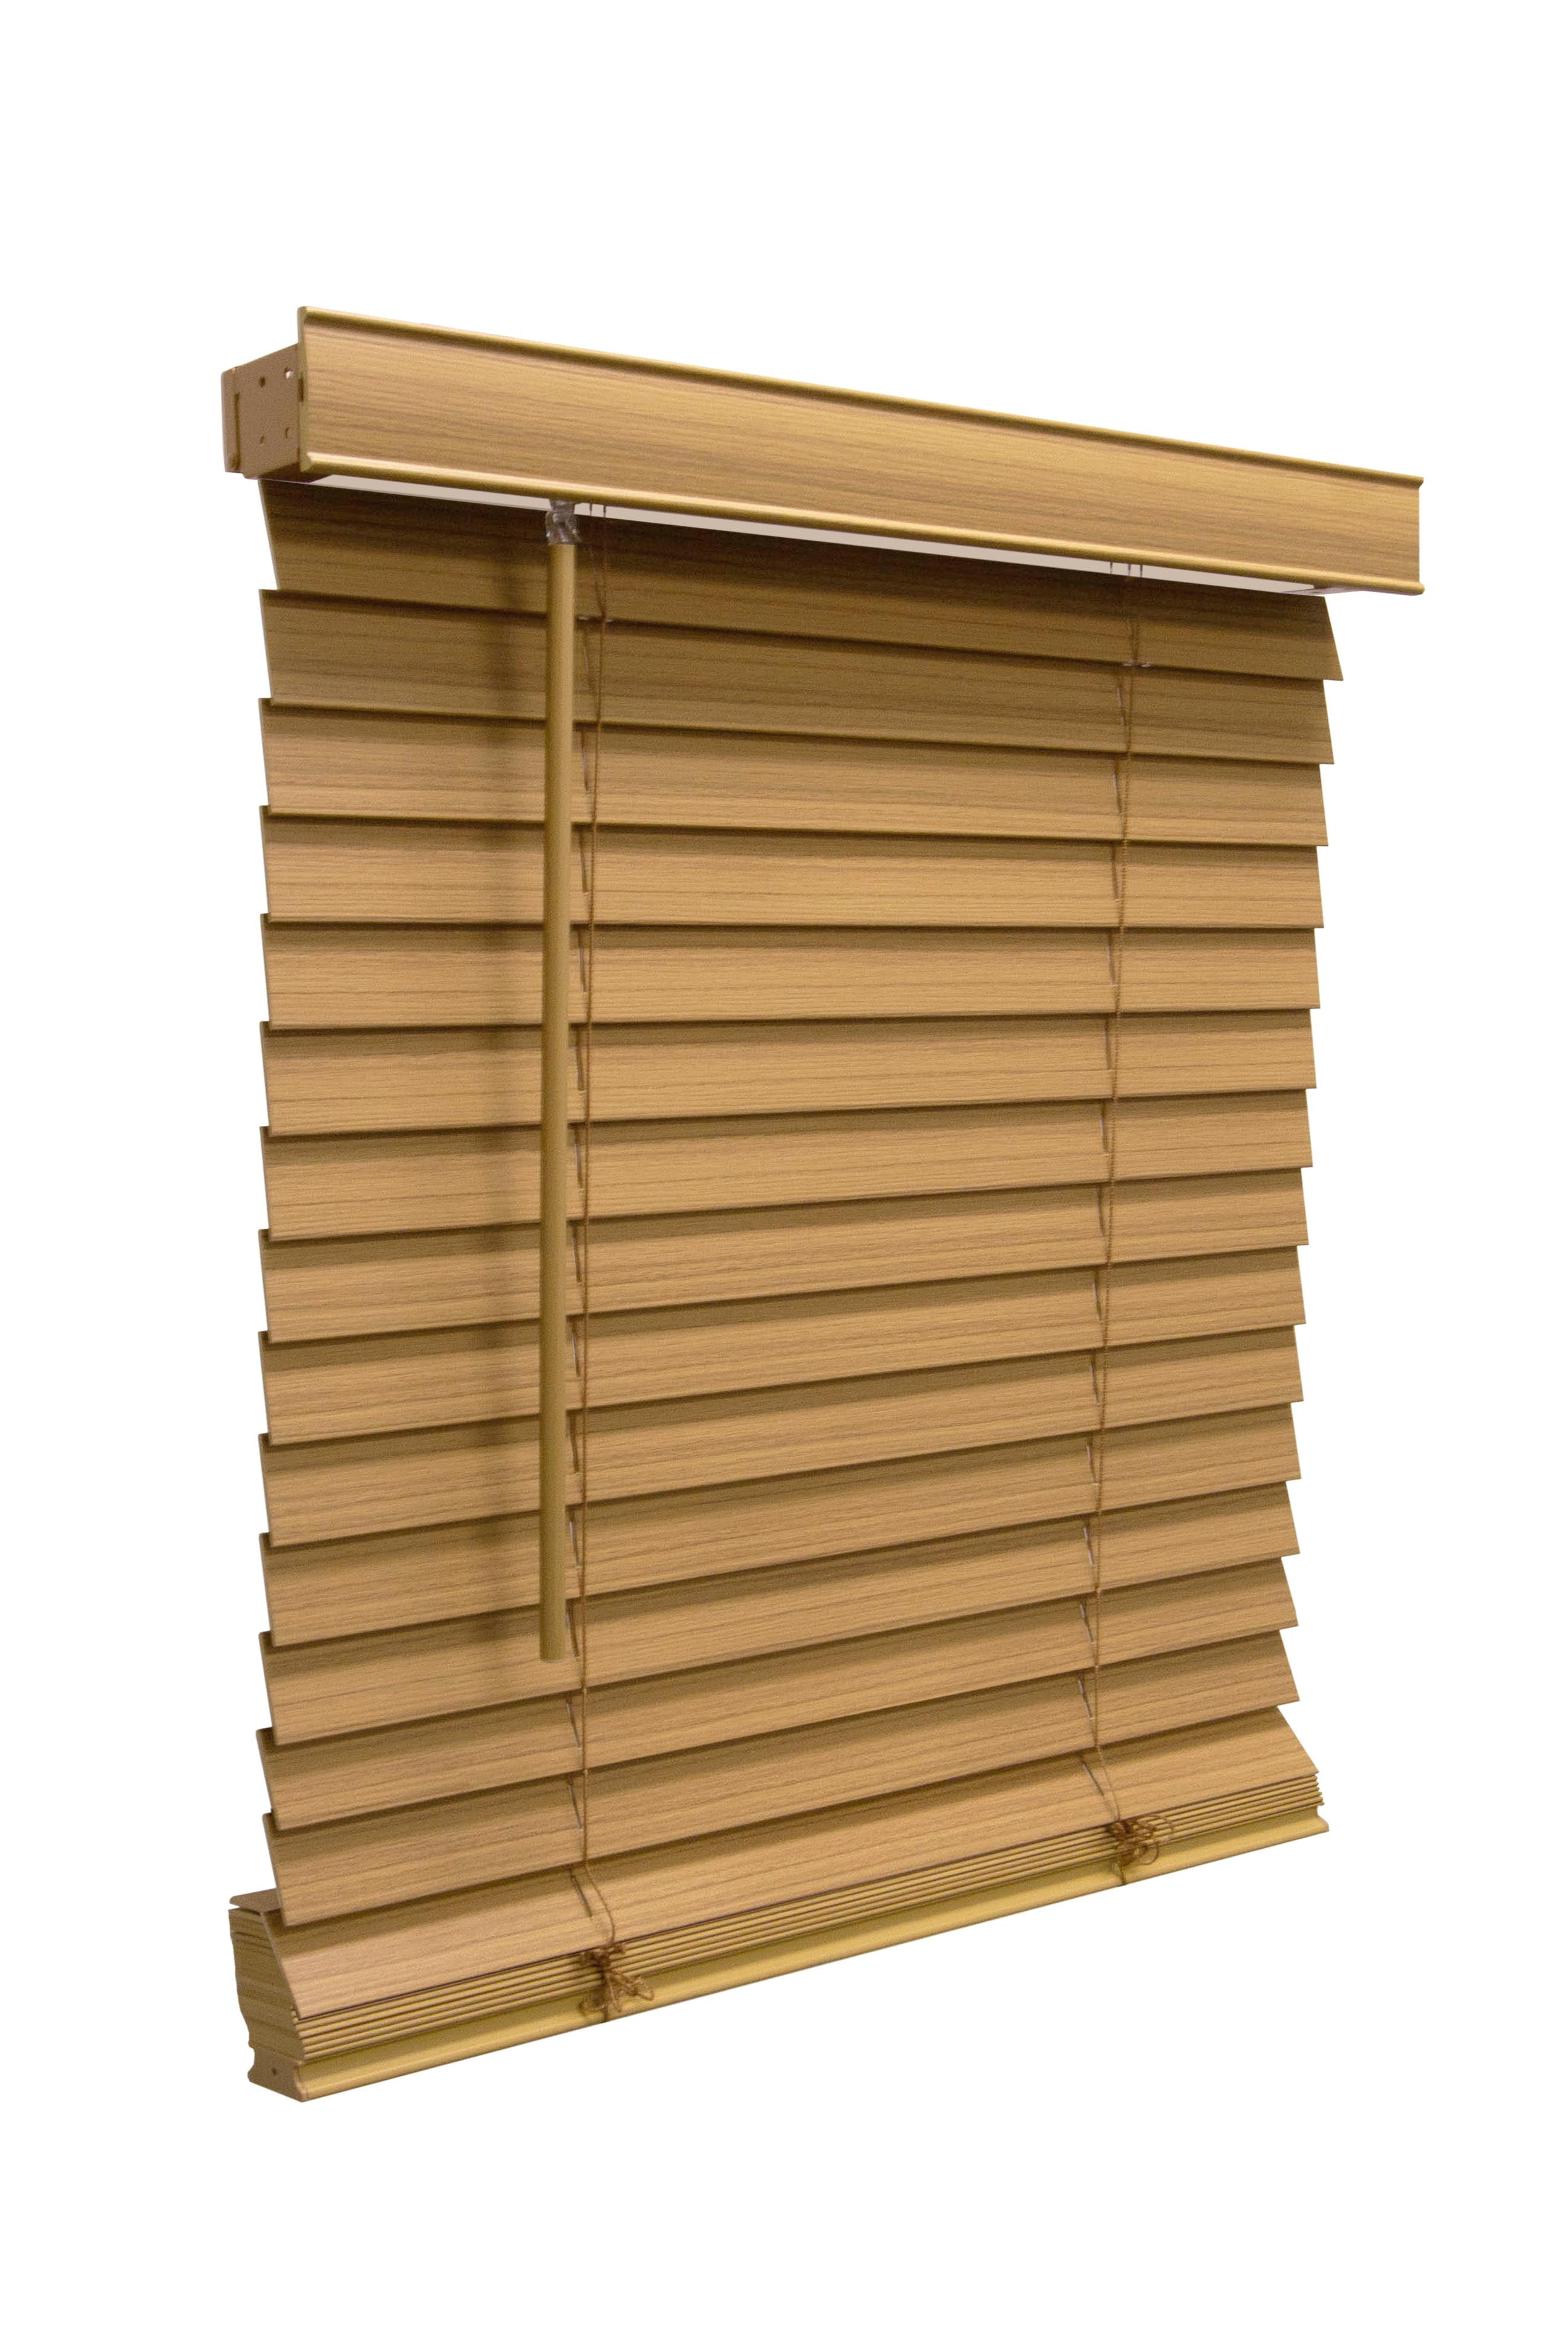 2 in - Faux Wood Blinds - Blinds - The Home Depot